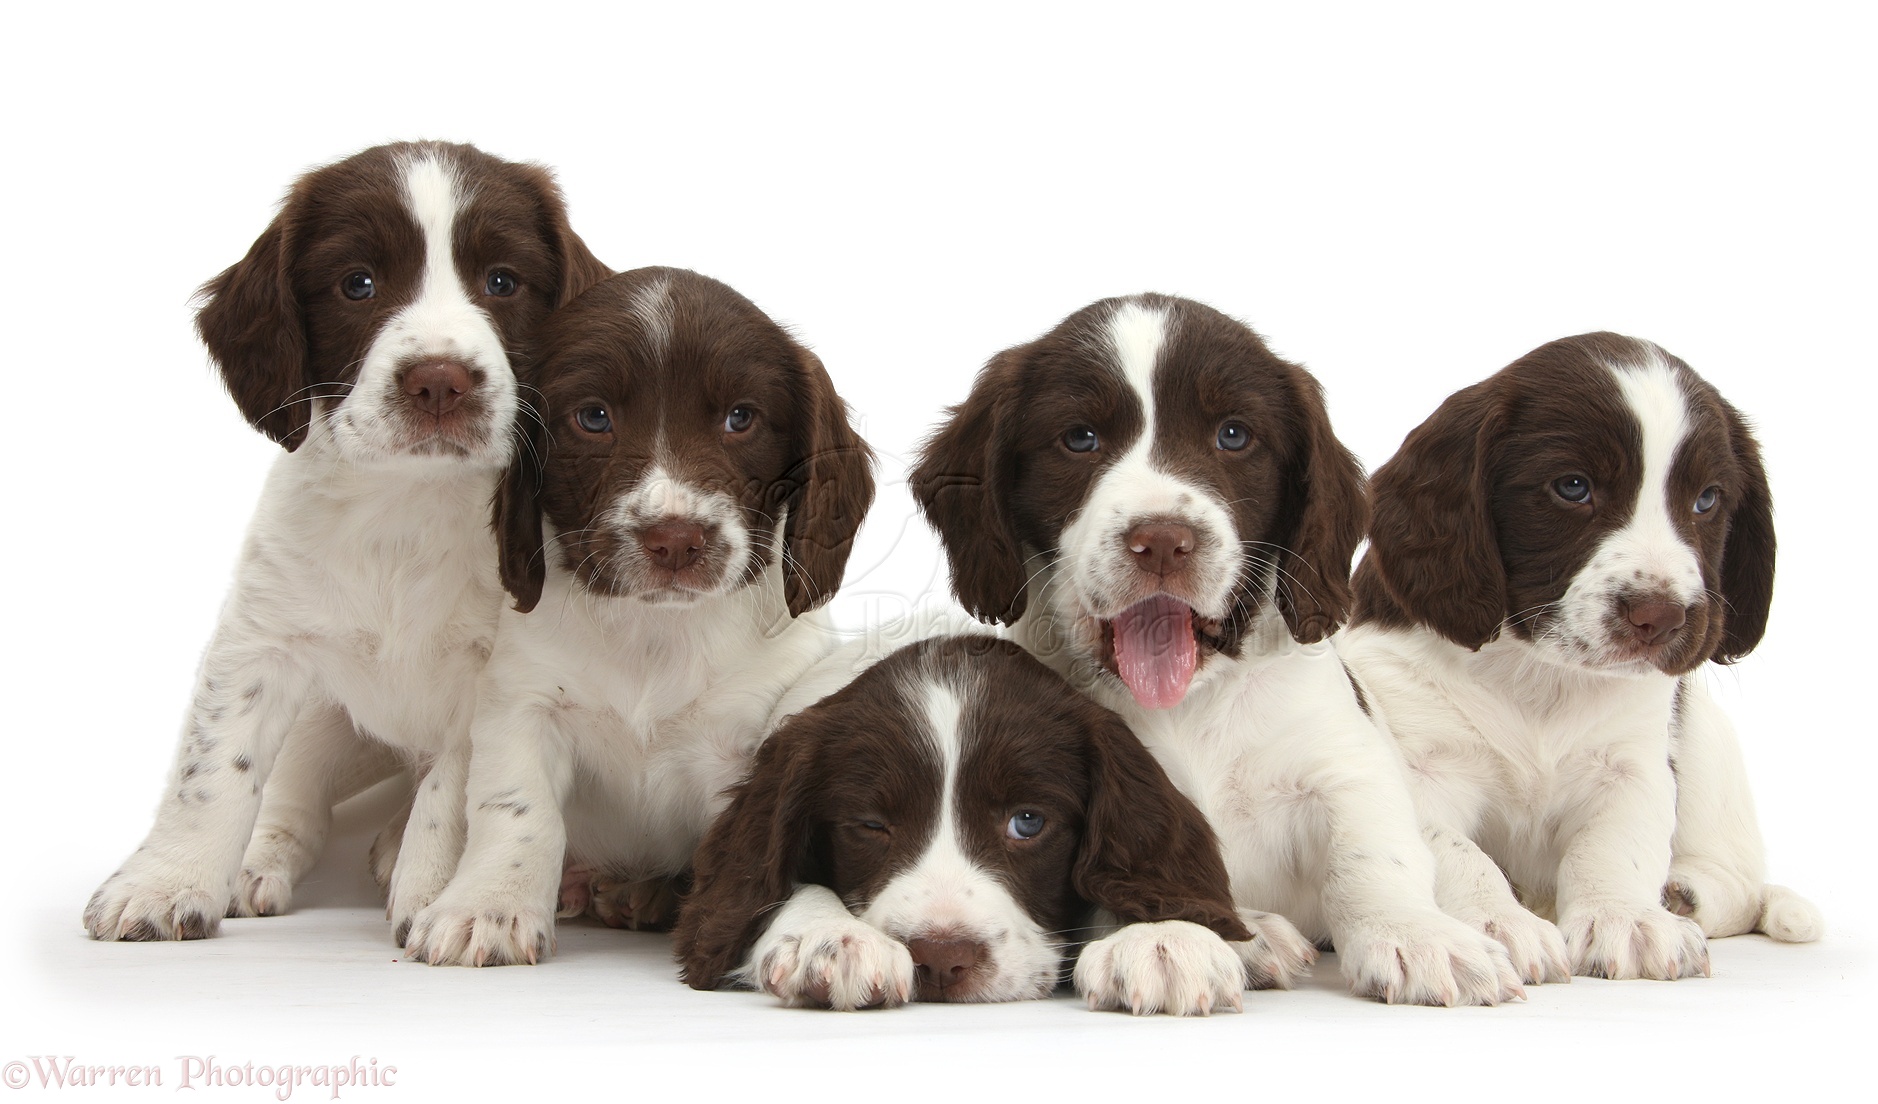 Dogs: Five Working English Springer Spaniel puppies photo WP45228